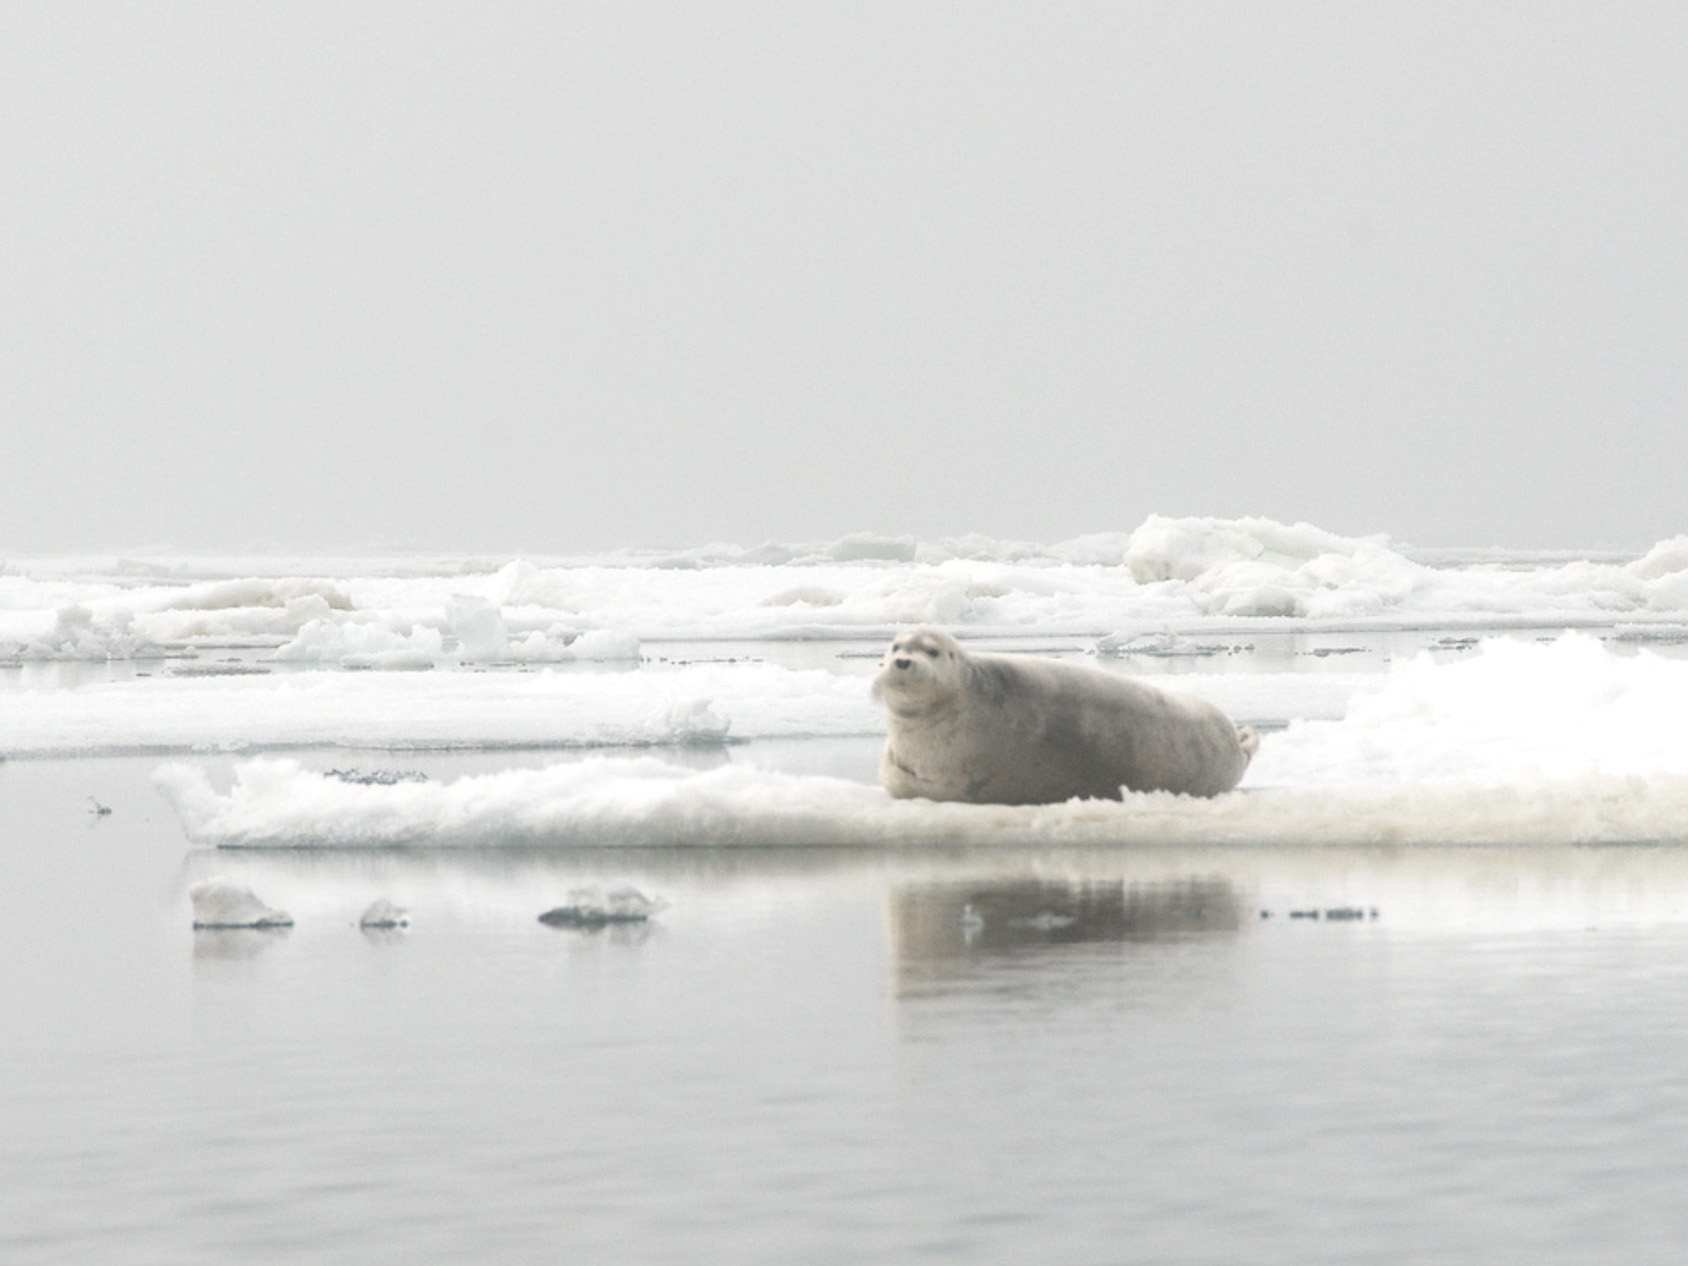 A high concentration of bearded seals reside amid the ice leads of the Chukchi Corridor, foraging around Hanna Shoal in summer, and migrating through Barrow Canyon in winter and spring.